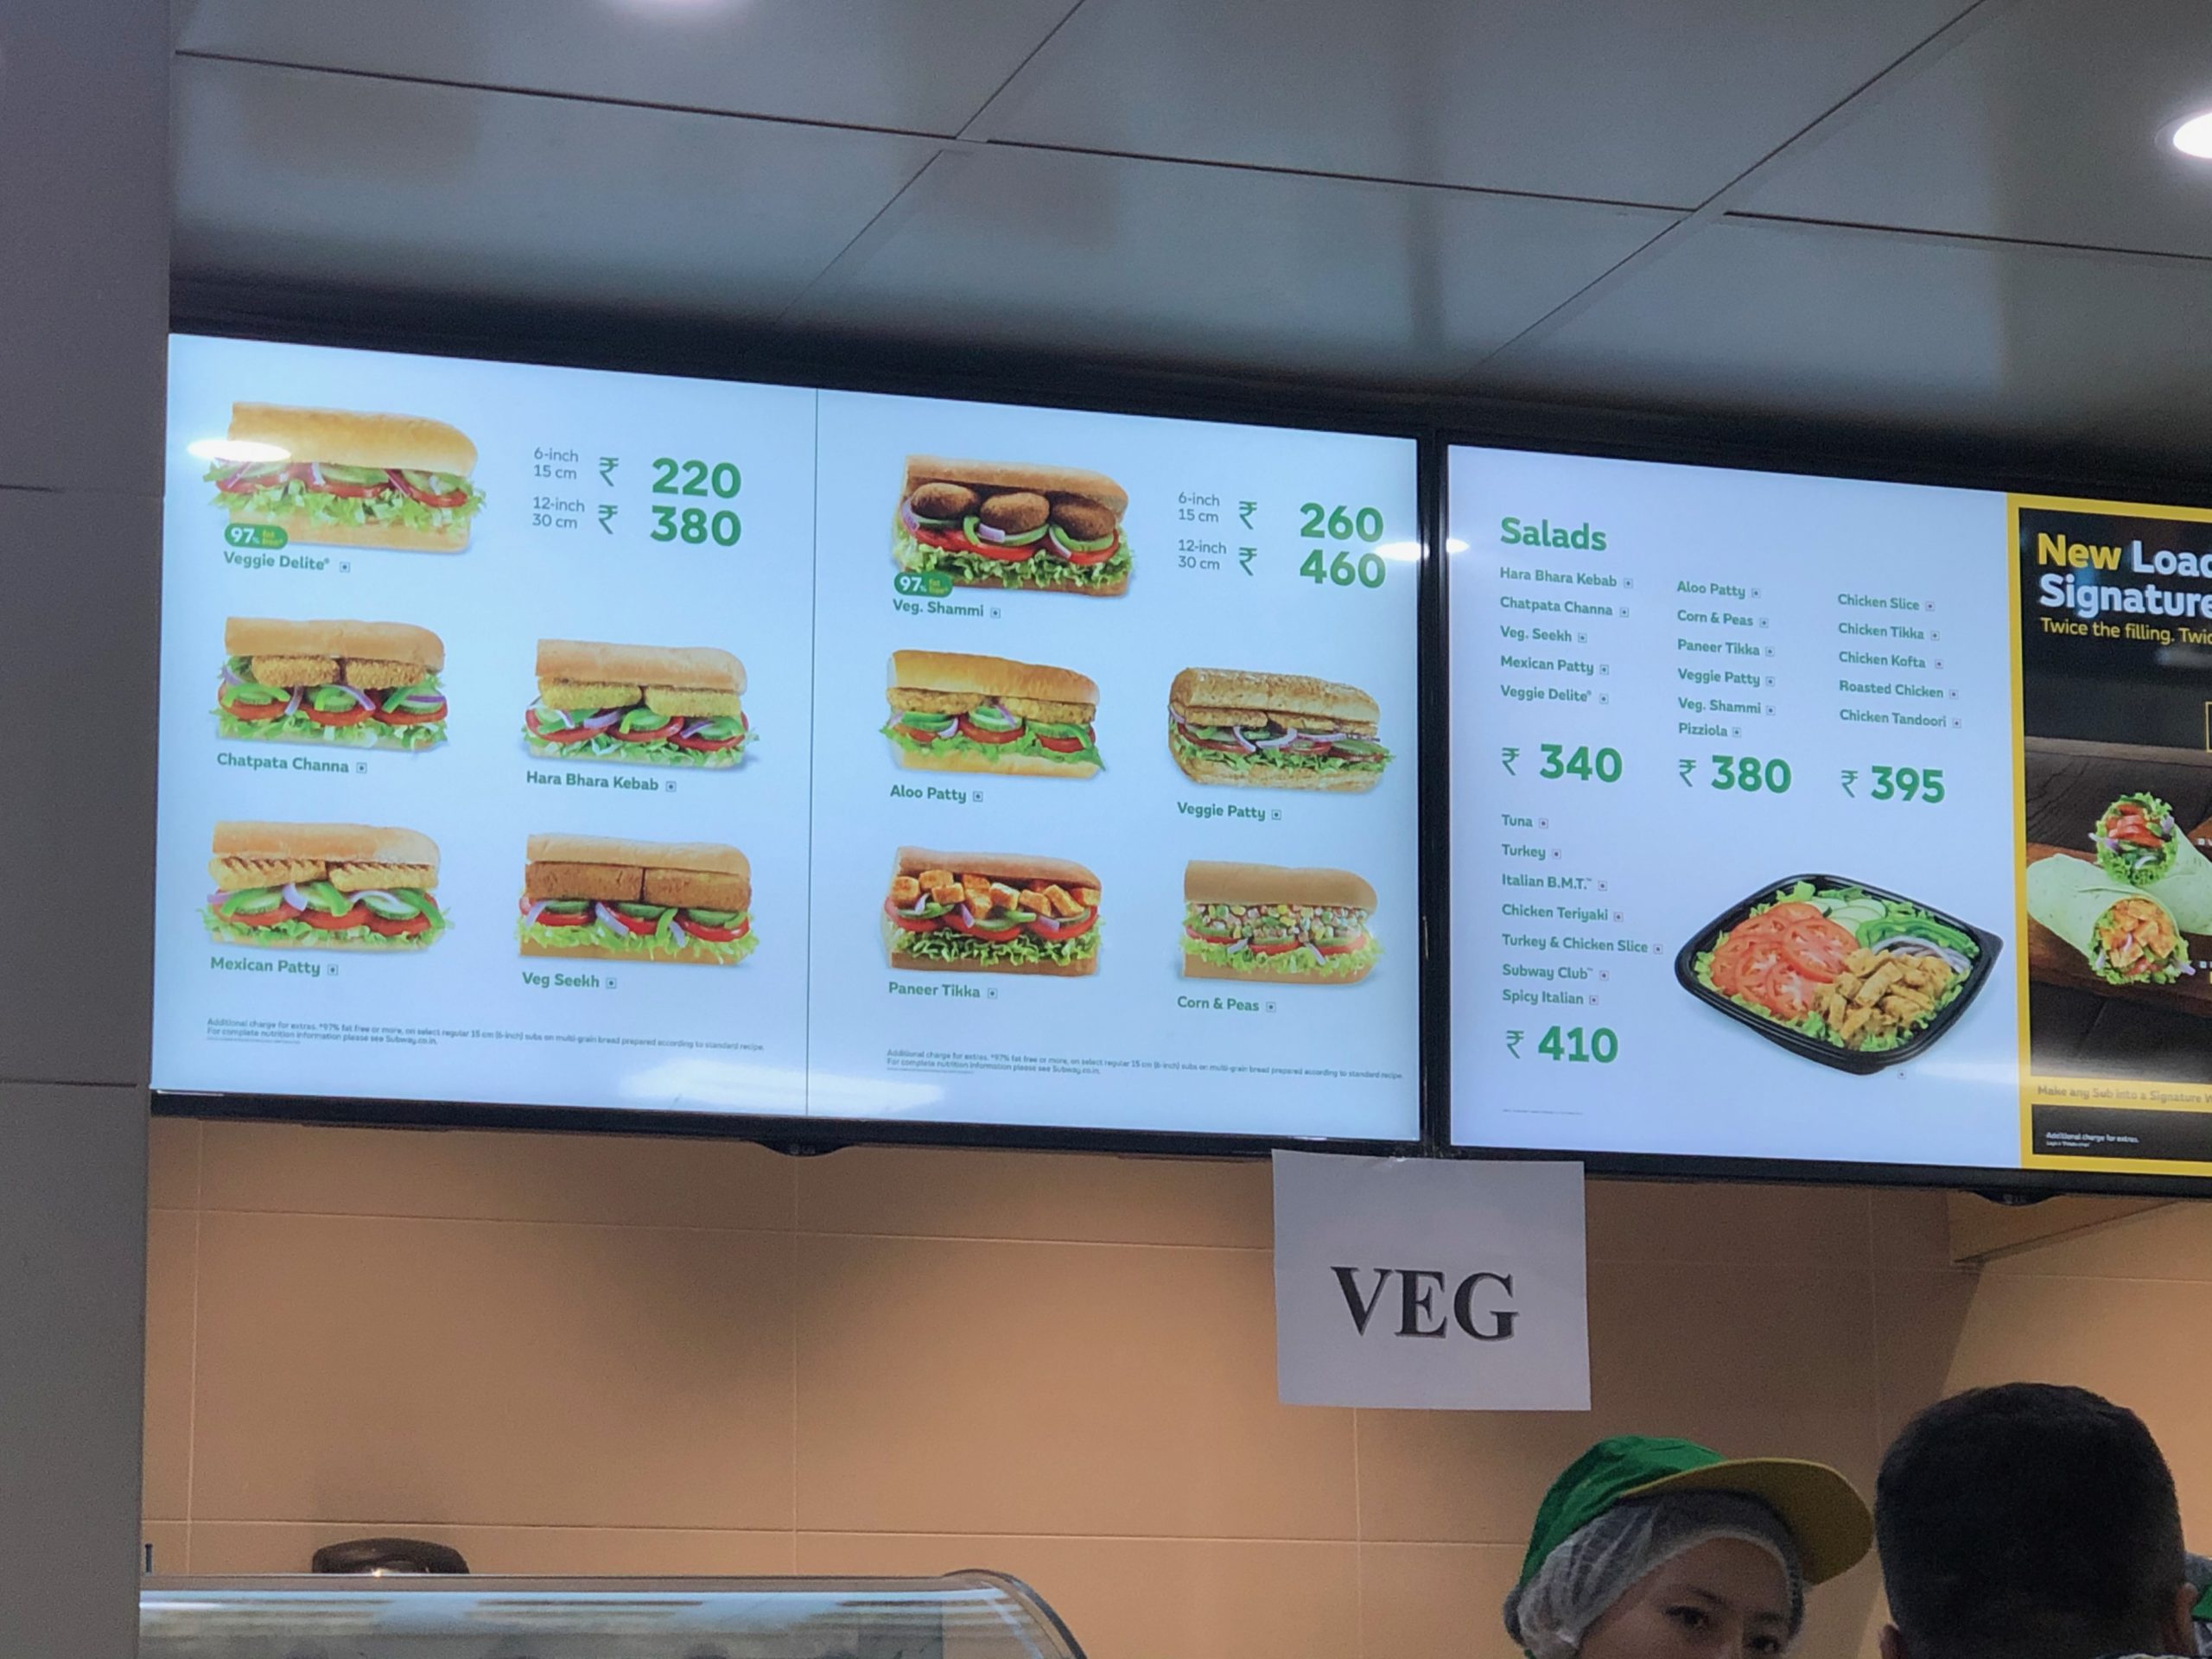 See how vegetarian friendly Subway is at the Goa airport?